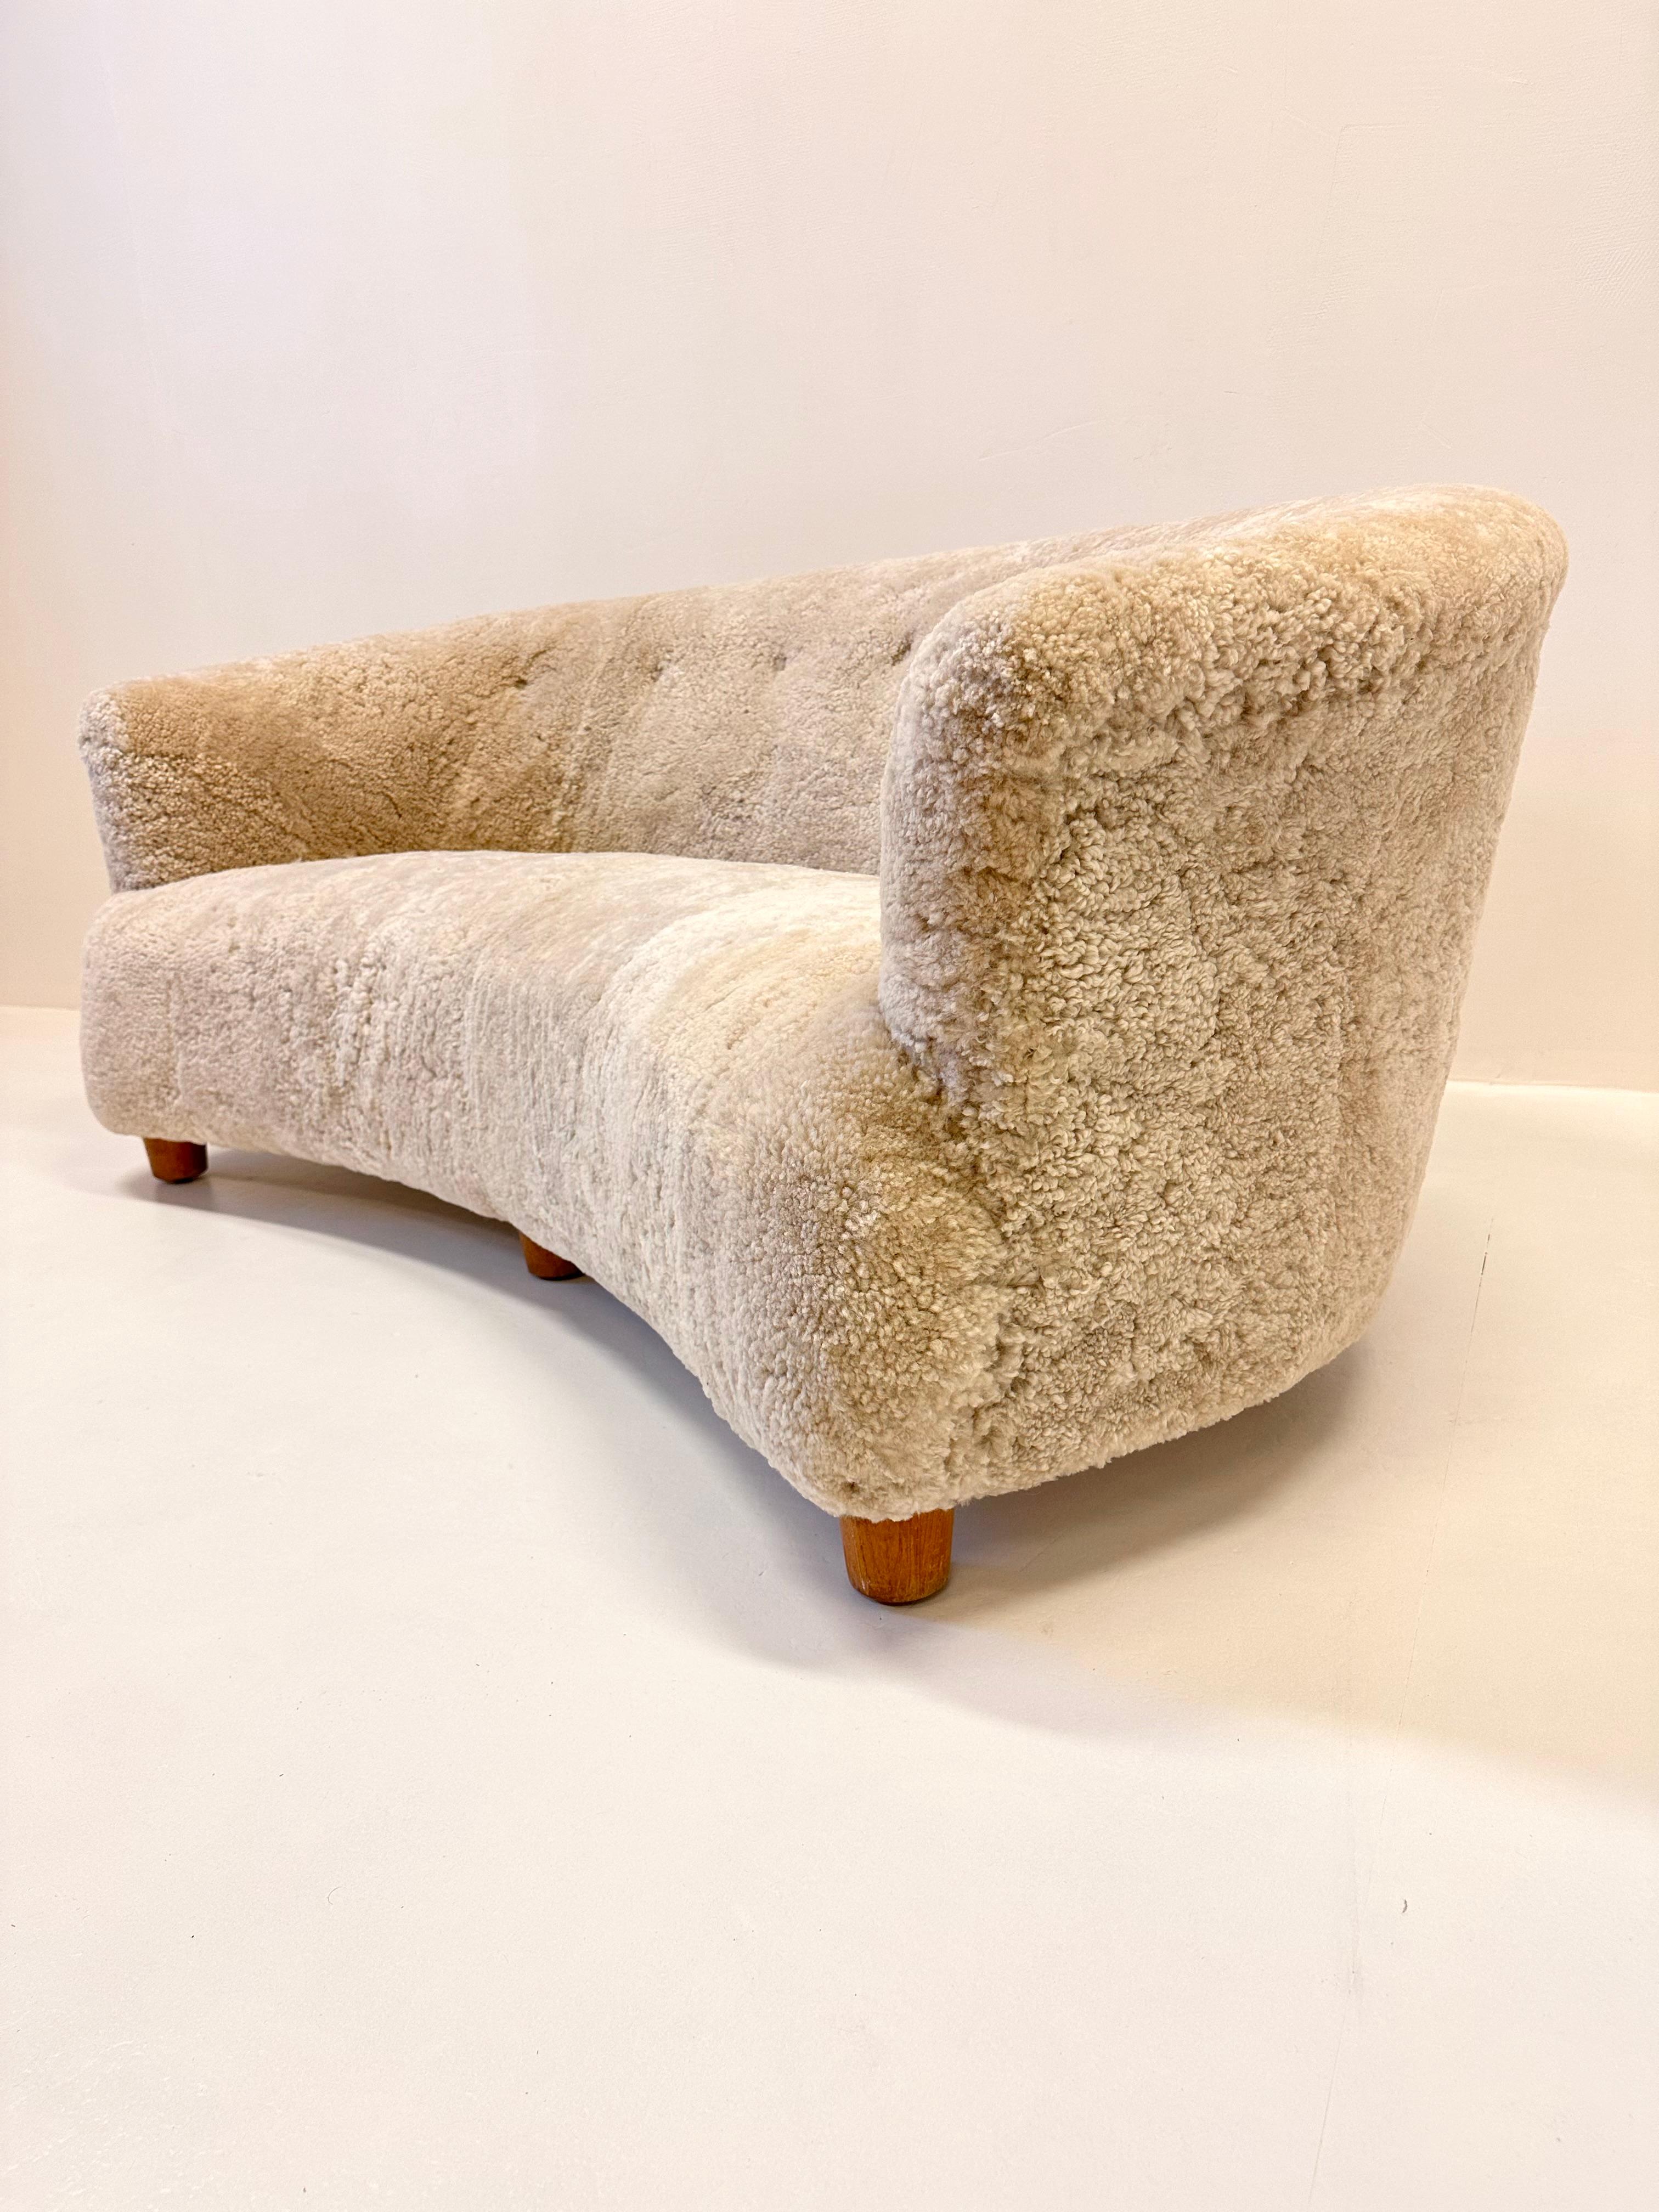 Amazing mid-century design Sheepskin Sofa, attributed to Otto Schulz. 

Big proportions and newly reupholstered and renovated. 

Fast shipping with white glove packaging. 